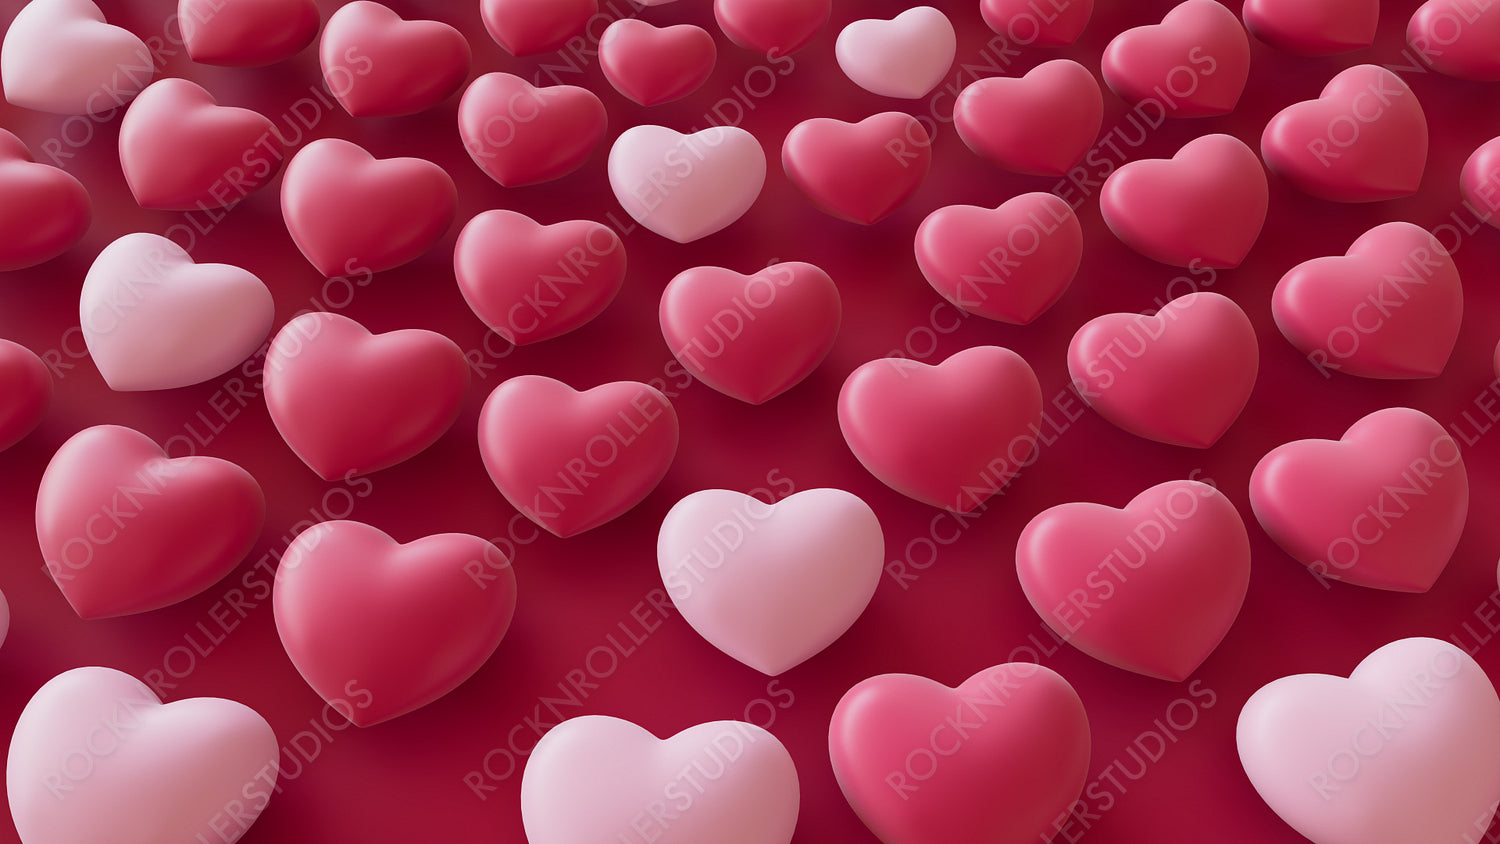 Light Pink and Dark Pink 3D Hearts arranged in the Shape of a Spiral. Contemporary Valentine's Day Background. 3D Render.